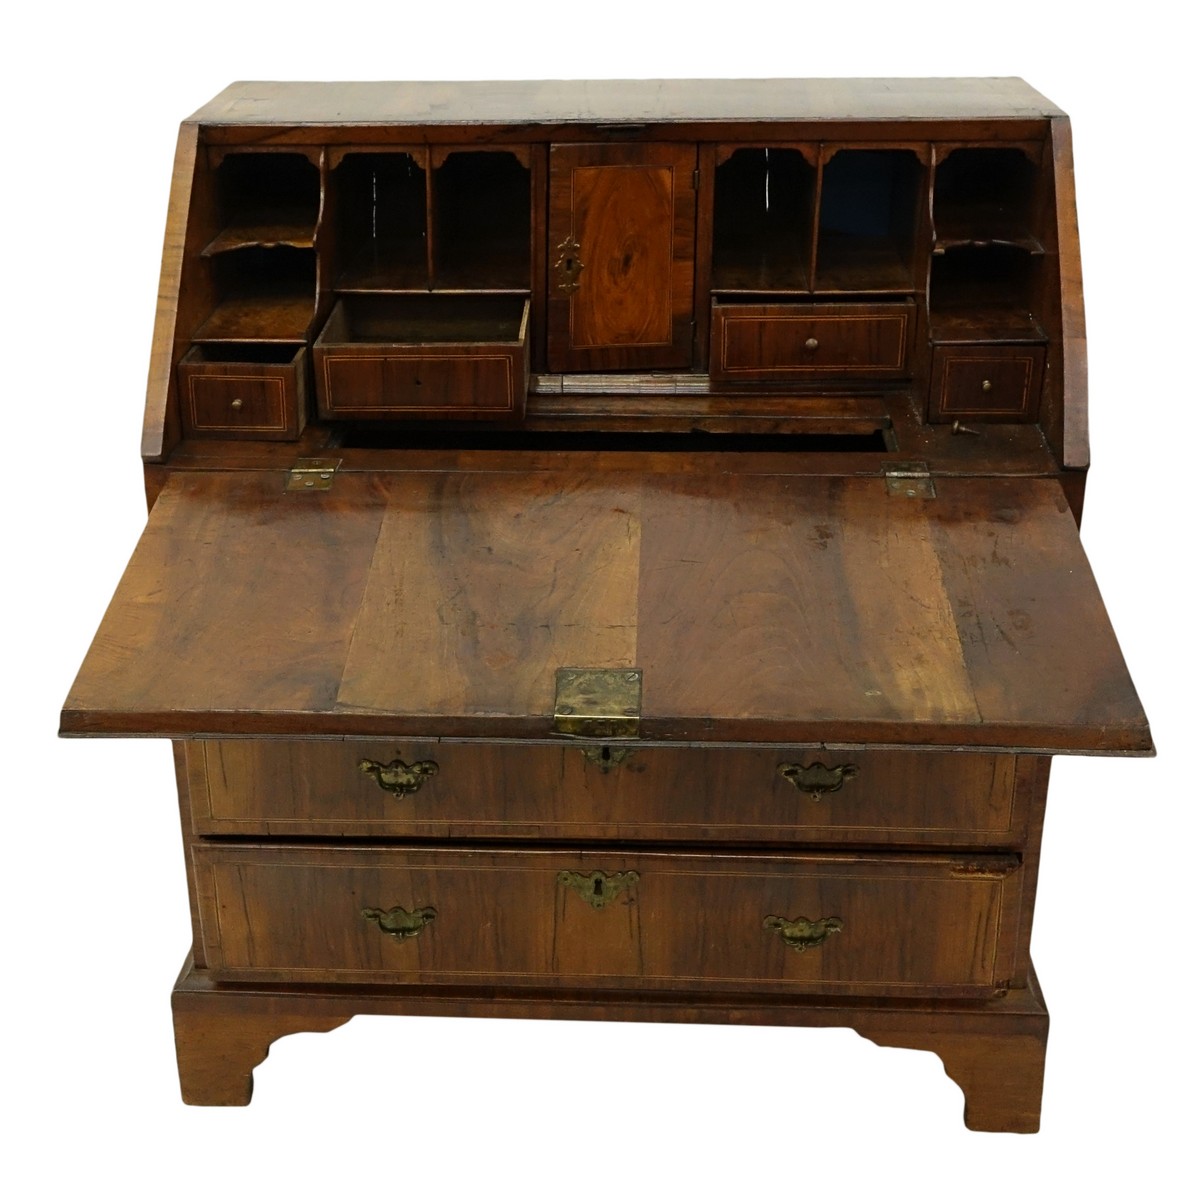 18/19th Century French Inlaid Drop Front Desk with Bronze Pulls. Two sliding drawers and two large drawers, interior compartments.